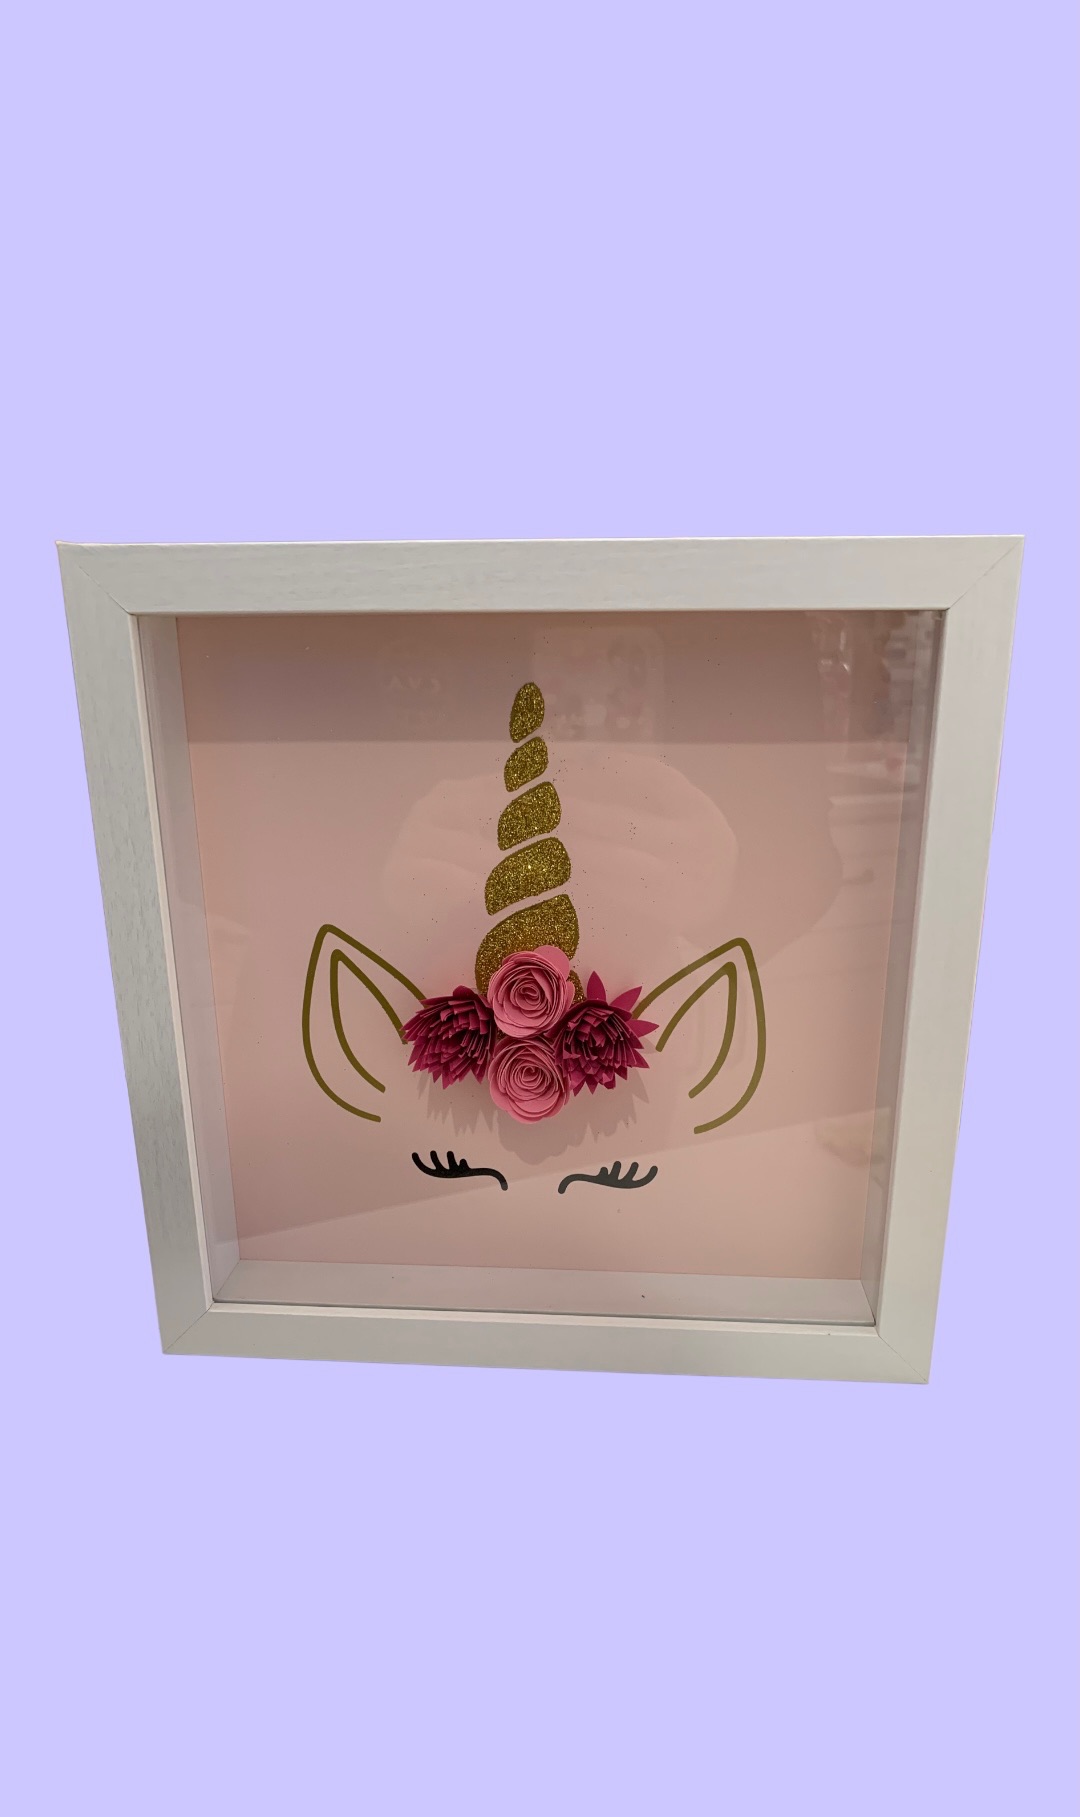 This Unicorn is made with love by Duo Deesigns! Shop more unique gift ideas today with Spots Initiatives, the best way to support creators.